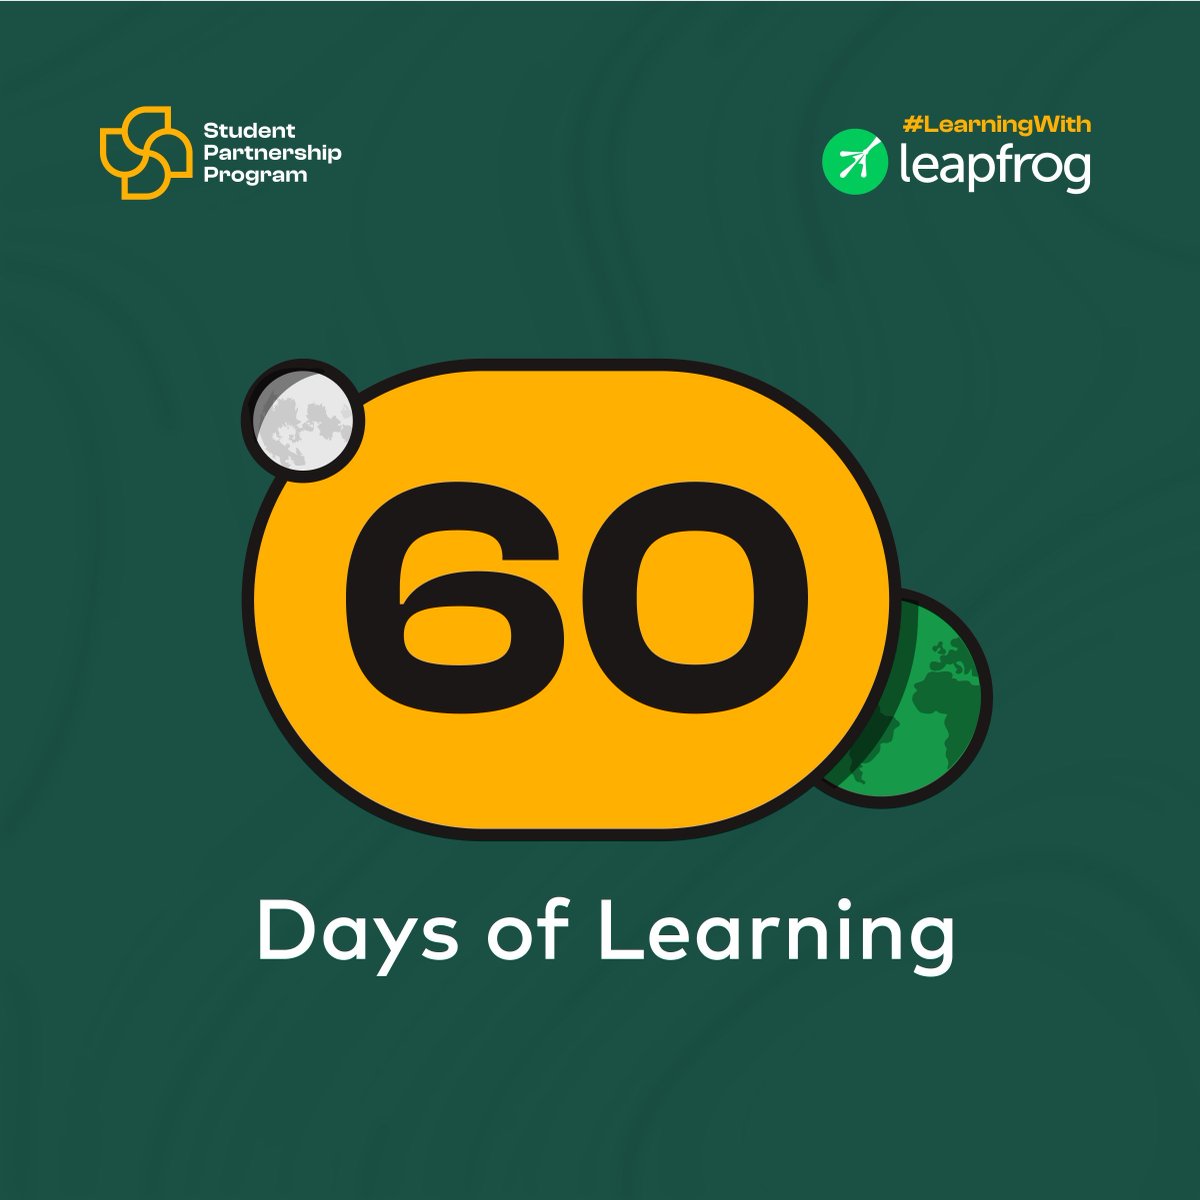 I'm Publicly committing to the  #60DaysOfLearningWithLeapfrog challenge starting today! #60DaysofLearning #LearningChallenge #LevelUp #ContinuousLearning #LifeAtLeapfrog